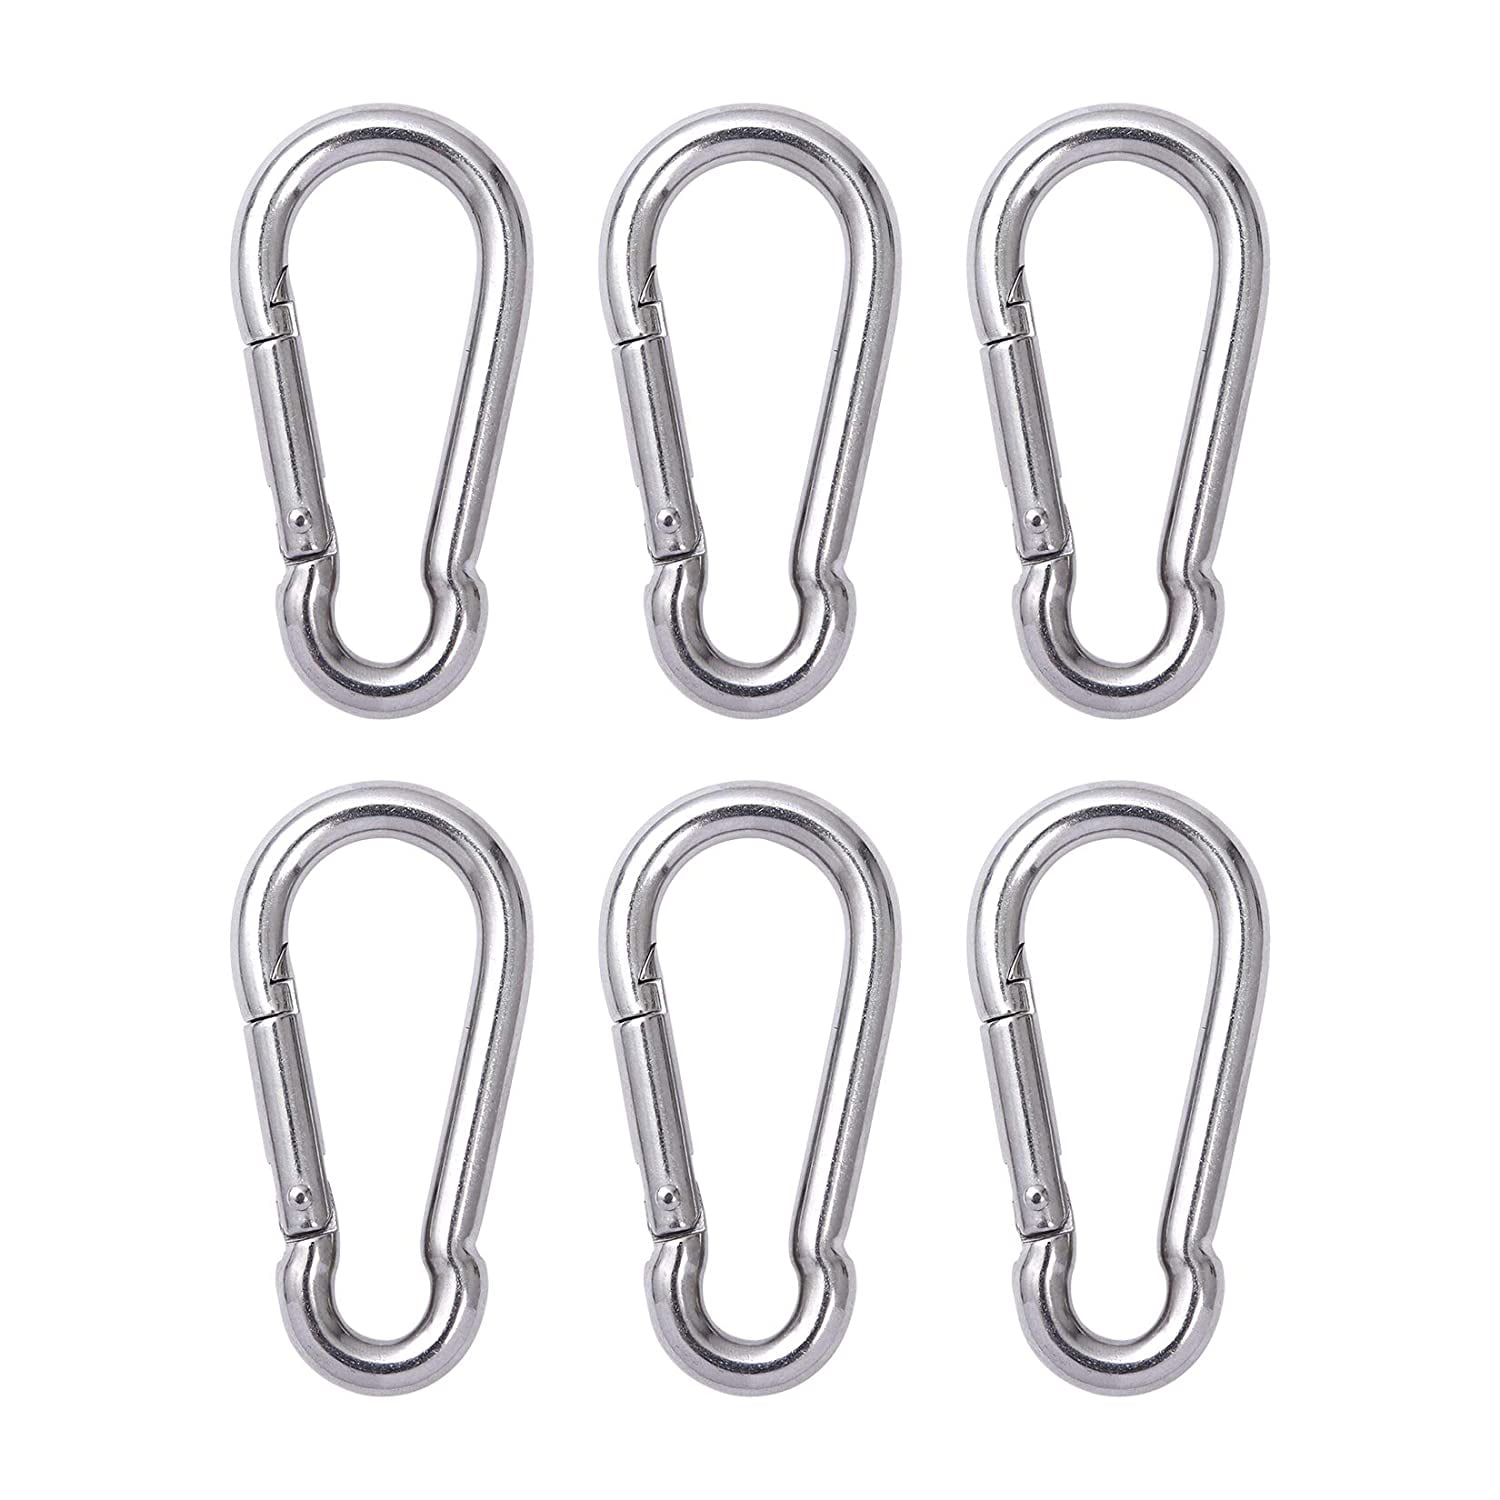 1, 1/2 Stainless Steel Snap Hook Carabiner Stainless Steel Spring Snap Hook Carabiner Clips Spring Snap Key Chain Clip Hook Heavy Duty Quick Link Lock Carabiner for Camping Hiking Dog Leash 